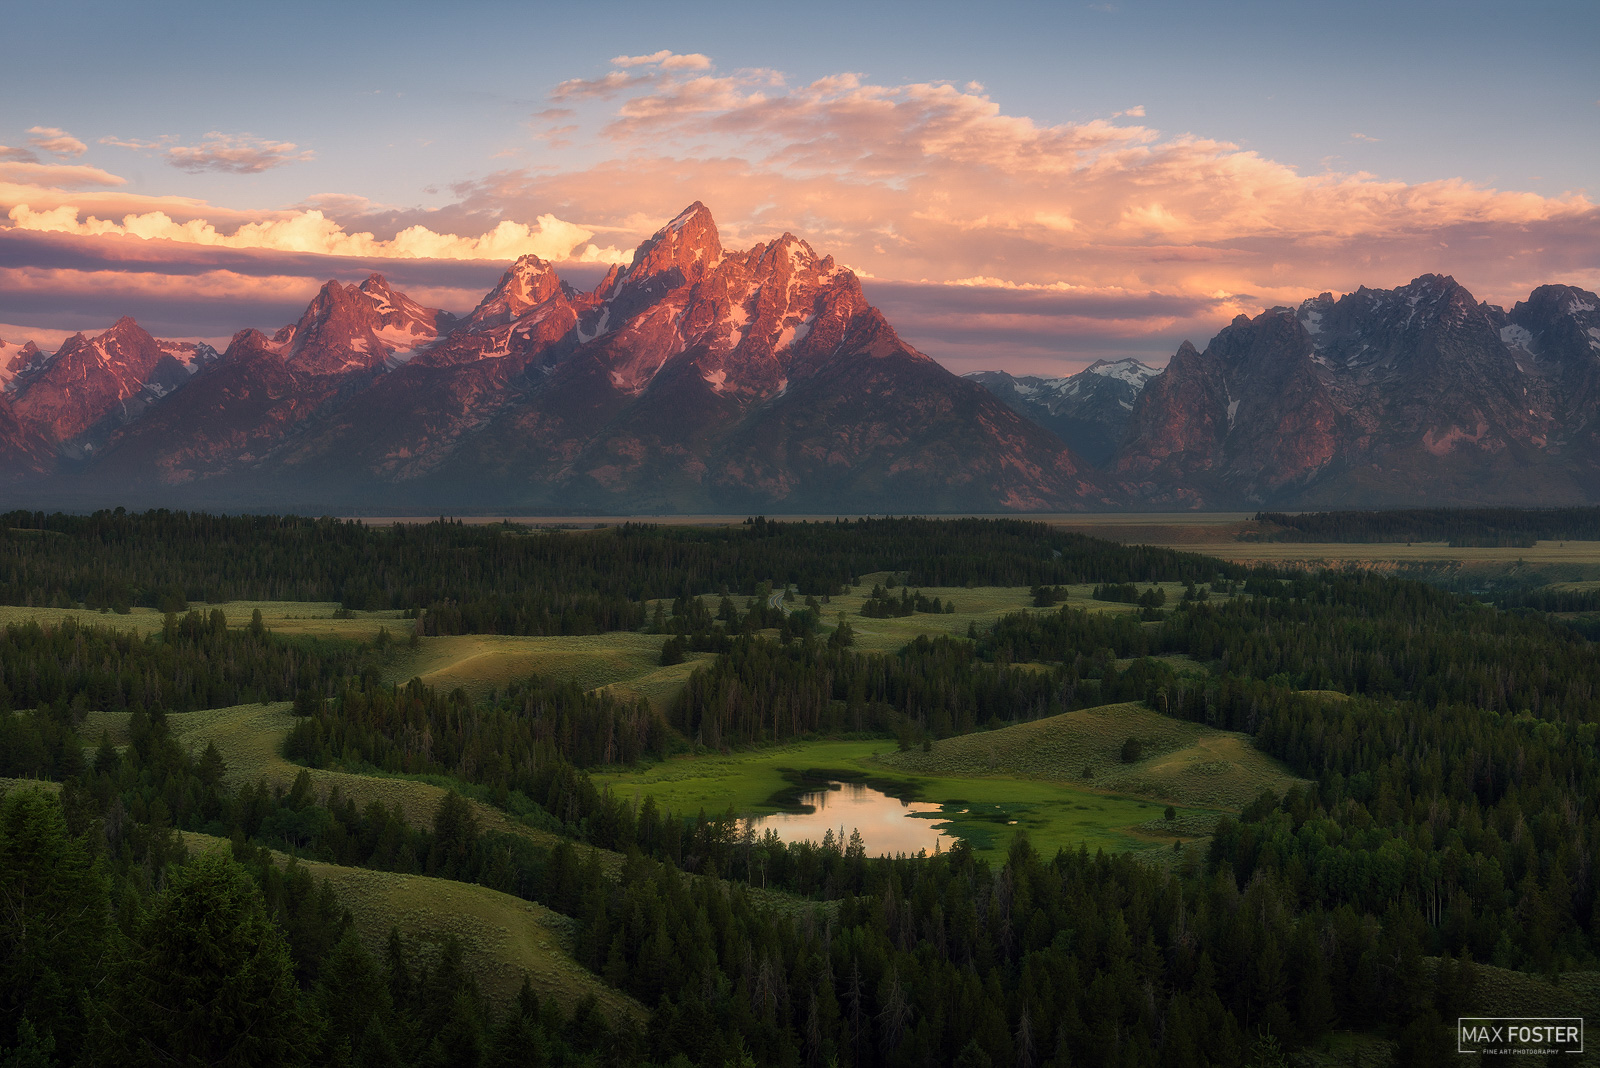 Refresh your space with Teton Magic, Max Foster's limited edition photography print of Grand Teton National Park in Wyoming from...